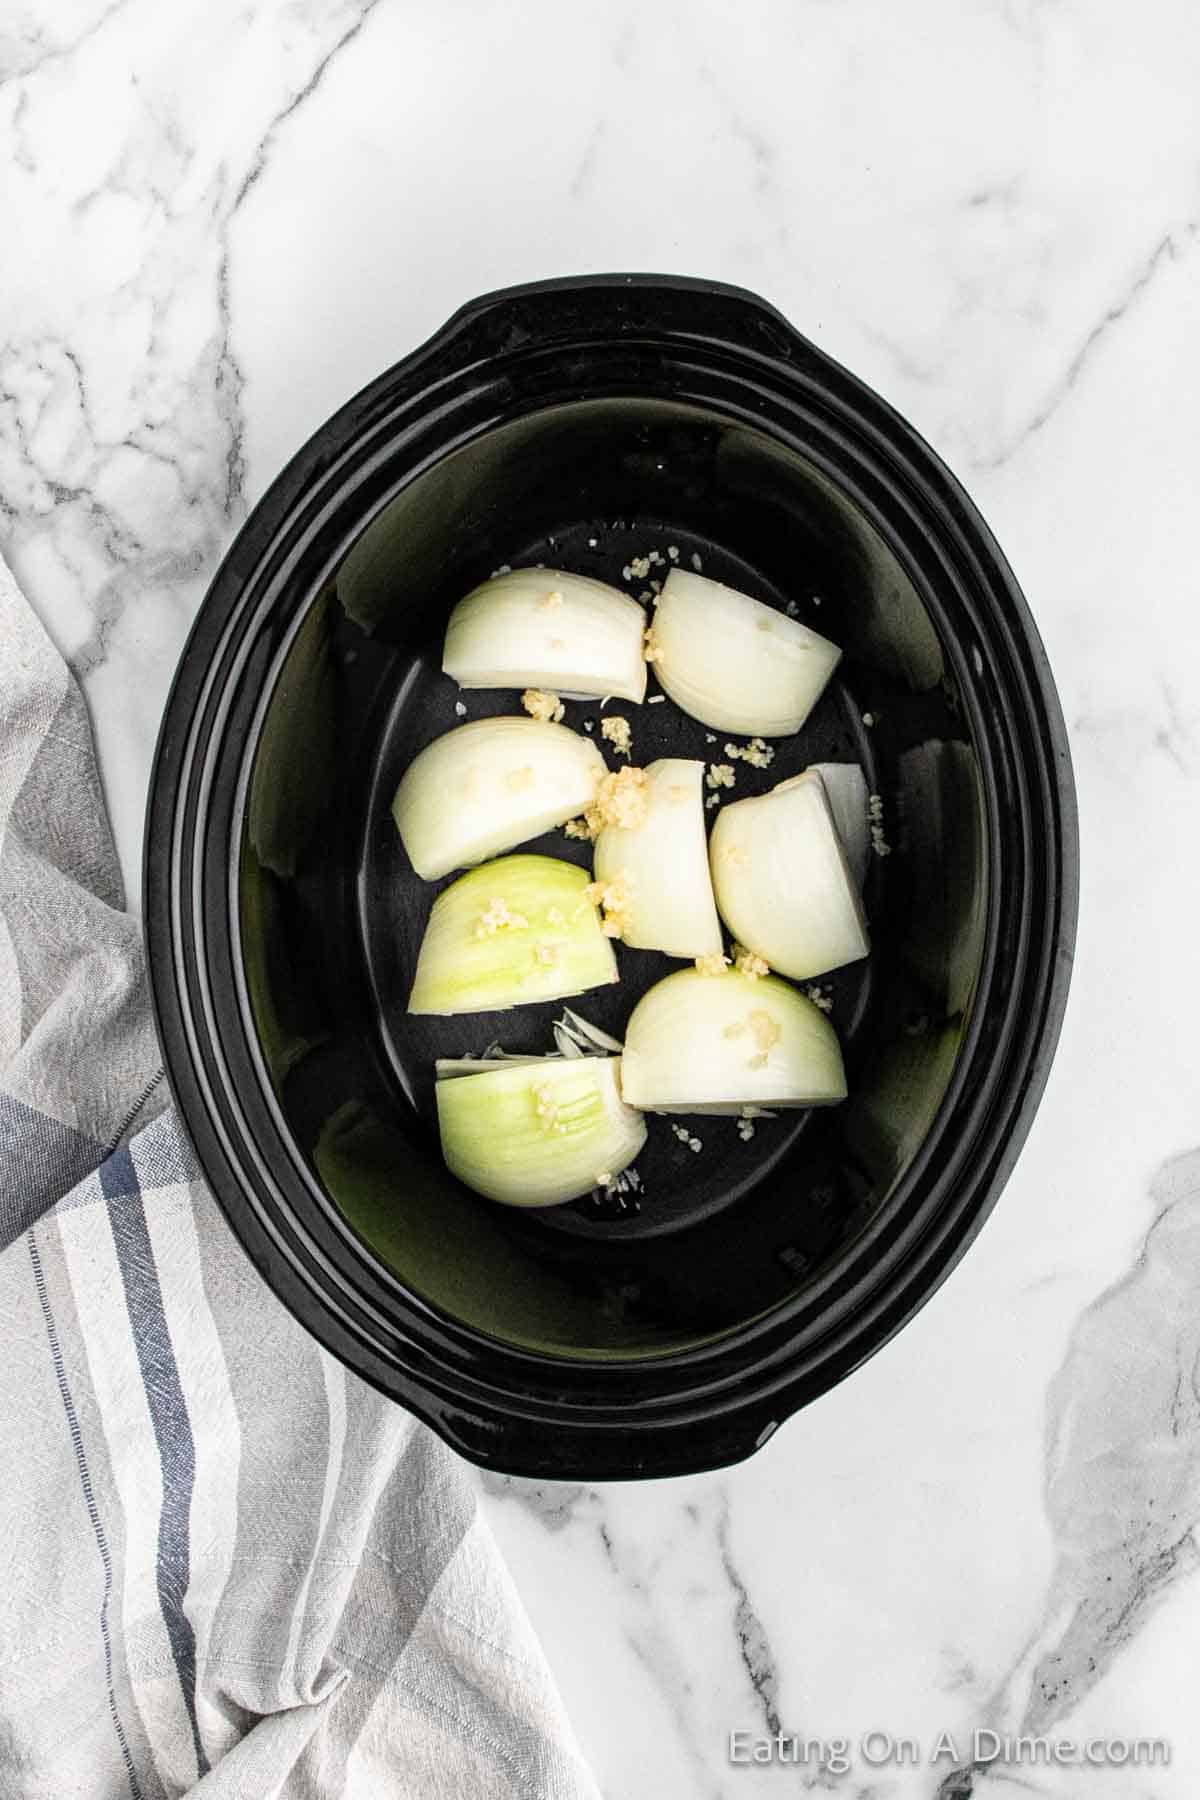 Placing the onions quarters and garlic in the slow cooker